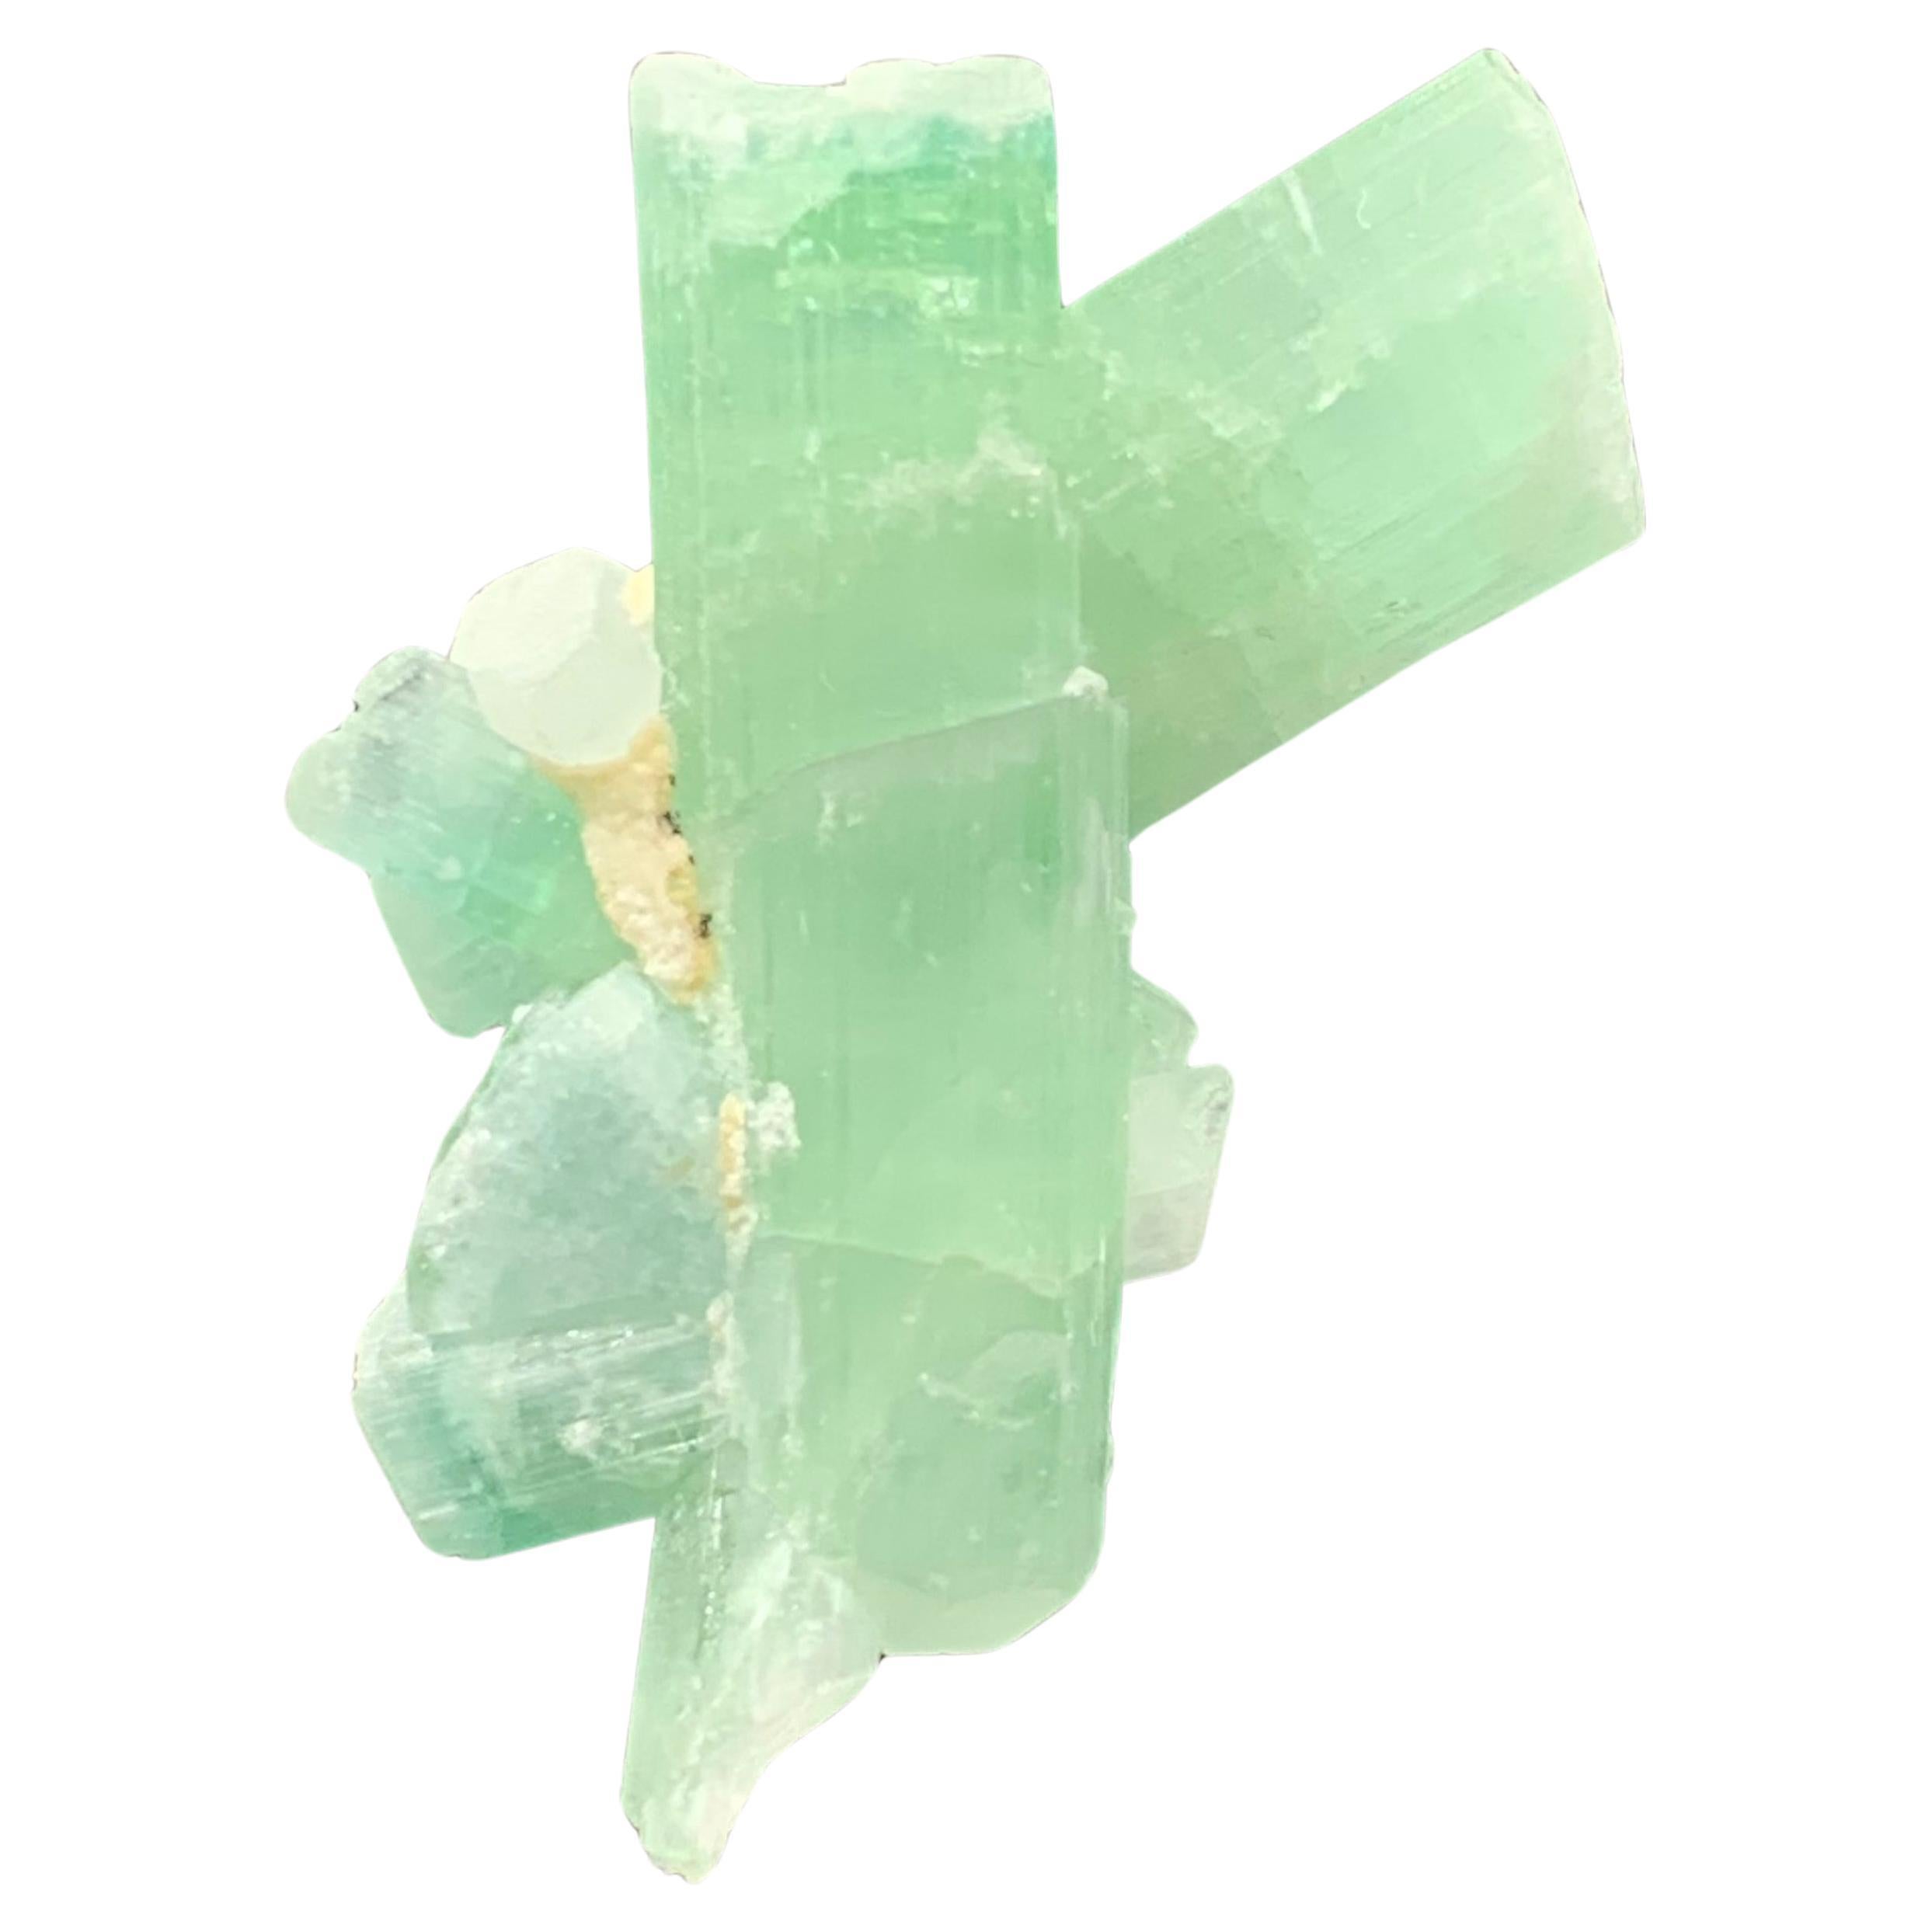 53.55 Cts Adorable Green Sea-foam Tourmaline Crystal Bunch From Afghanistan  For Sale